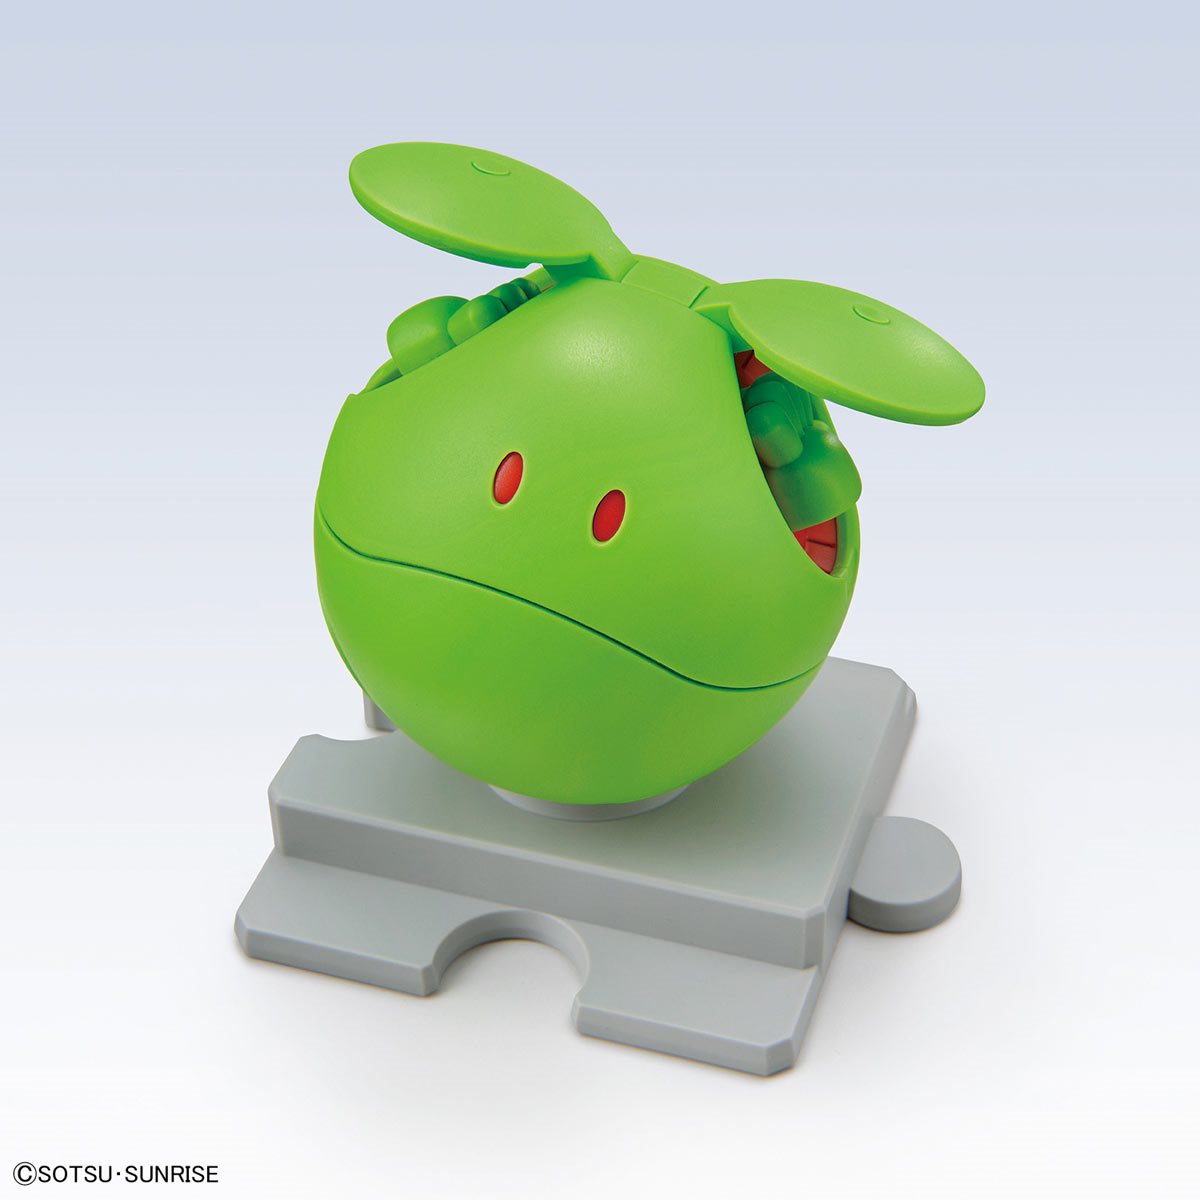 BANDAI Haro basic green clear color limited scale model kit 